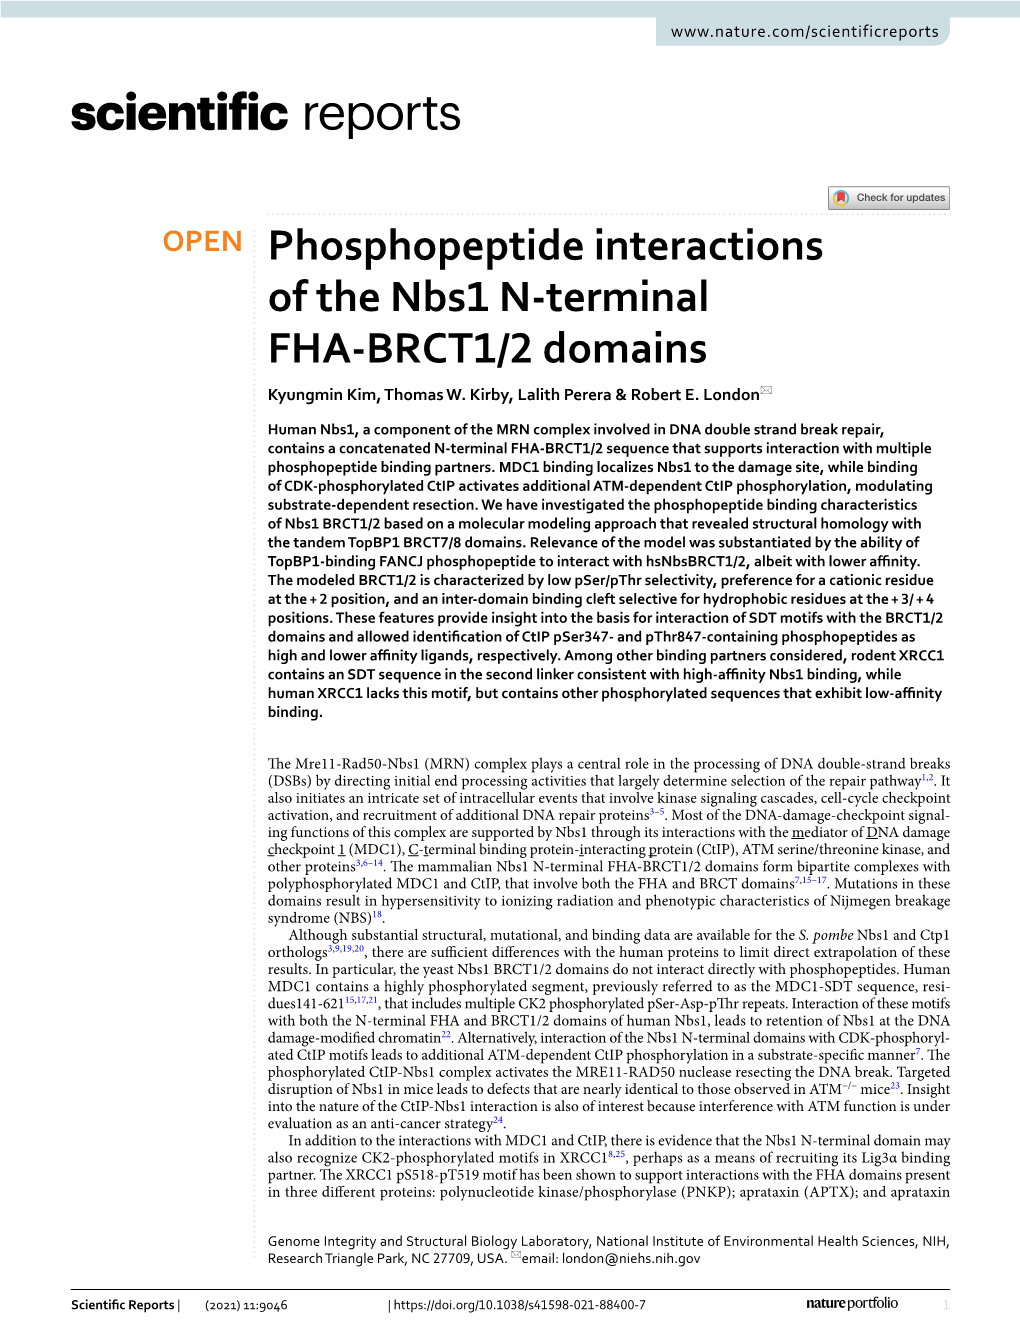 Phosphopeptide Interactions of the Nbs1 N-Terminal FHA-BRCT1/2